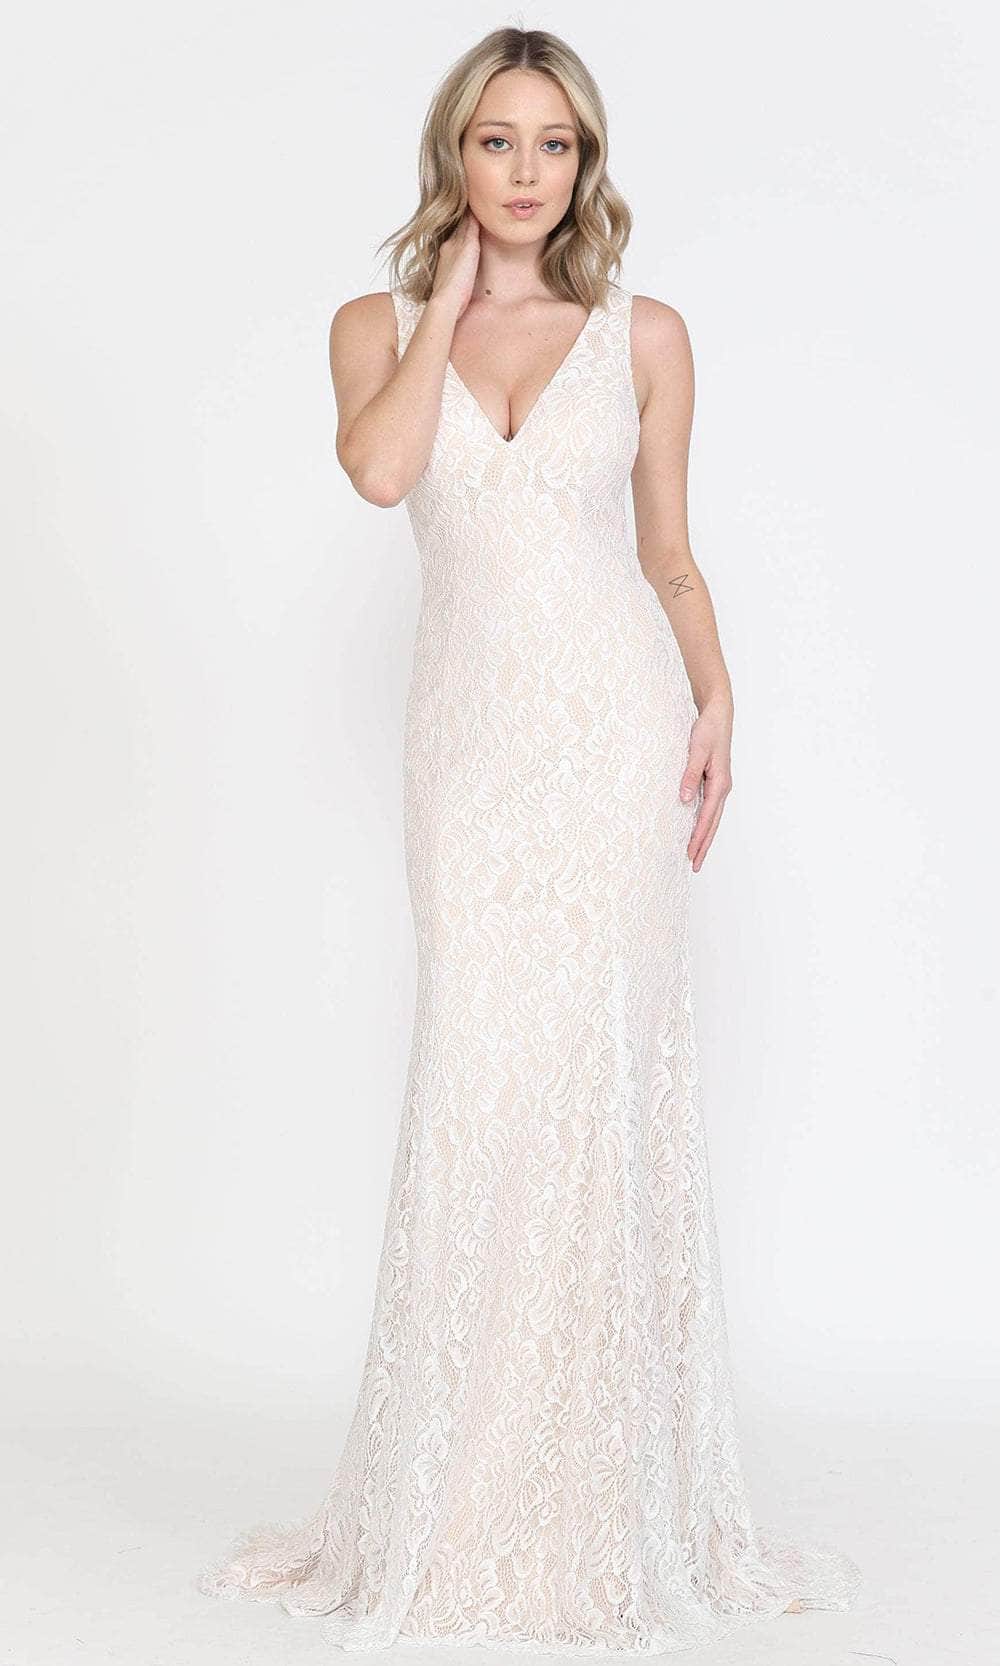 Image of Poly USA 8496 - Lace V-Neck Long Gown